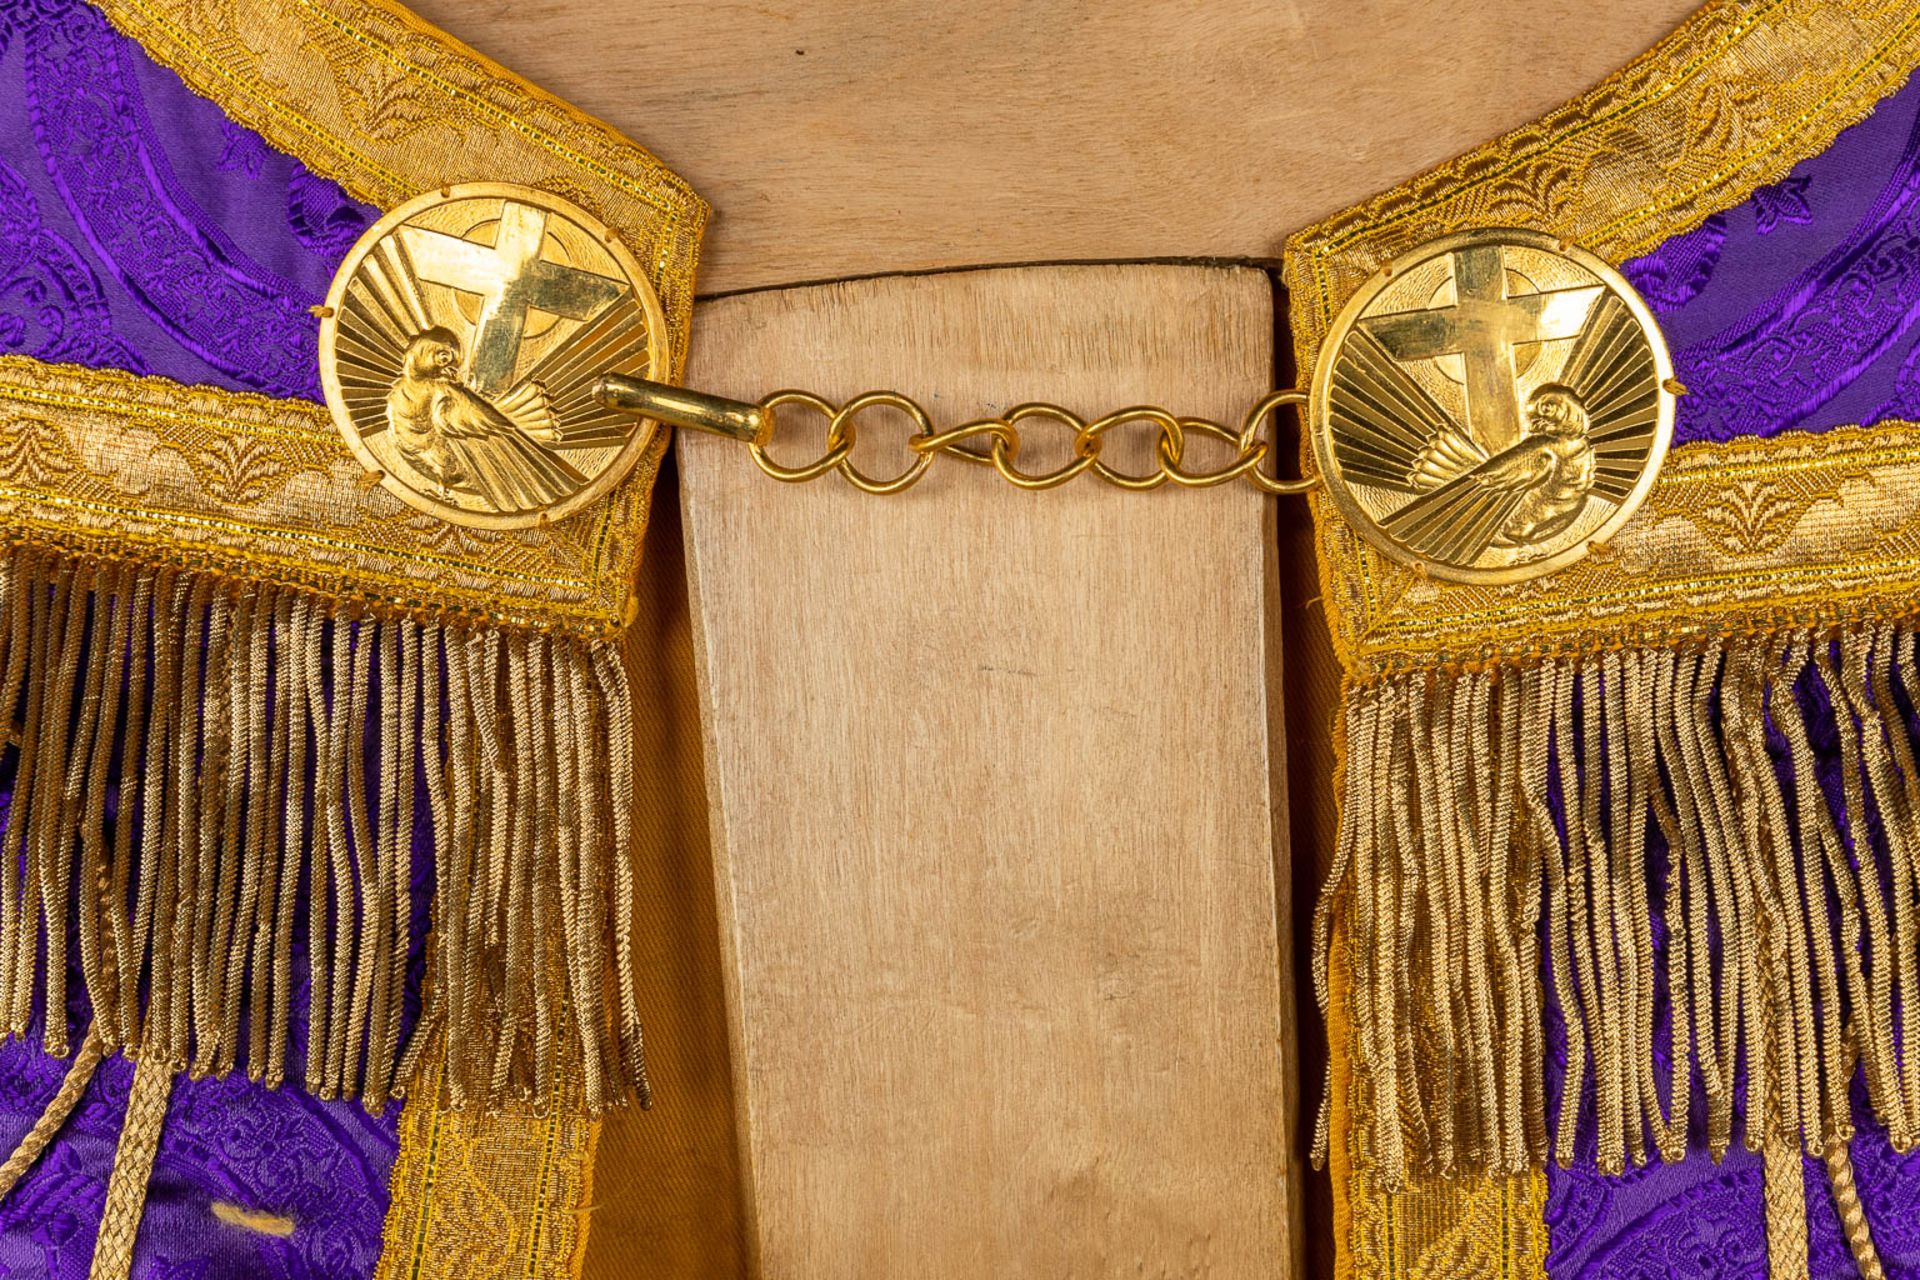 A Cope and Humeral Veil, finished with thick gold thread and purple fabric and the IHS logo. - Image 11 of 12